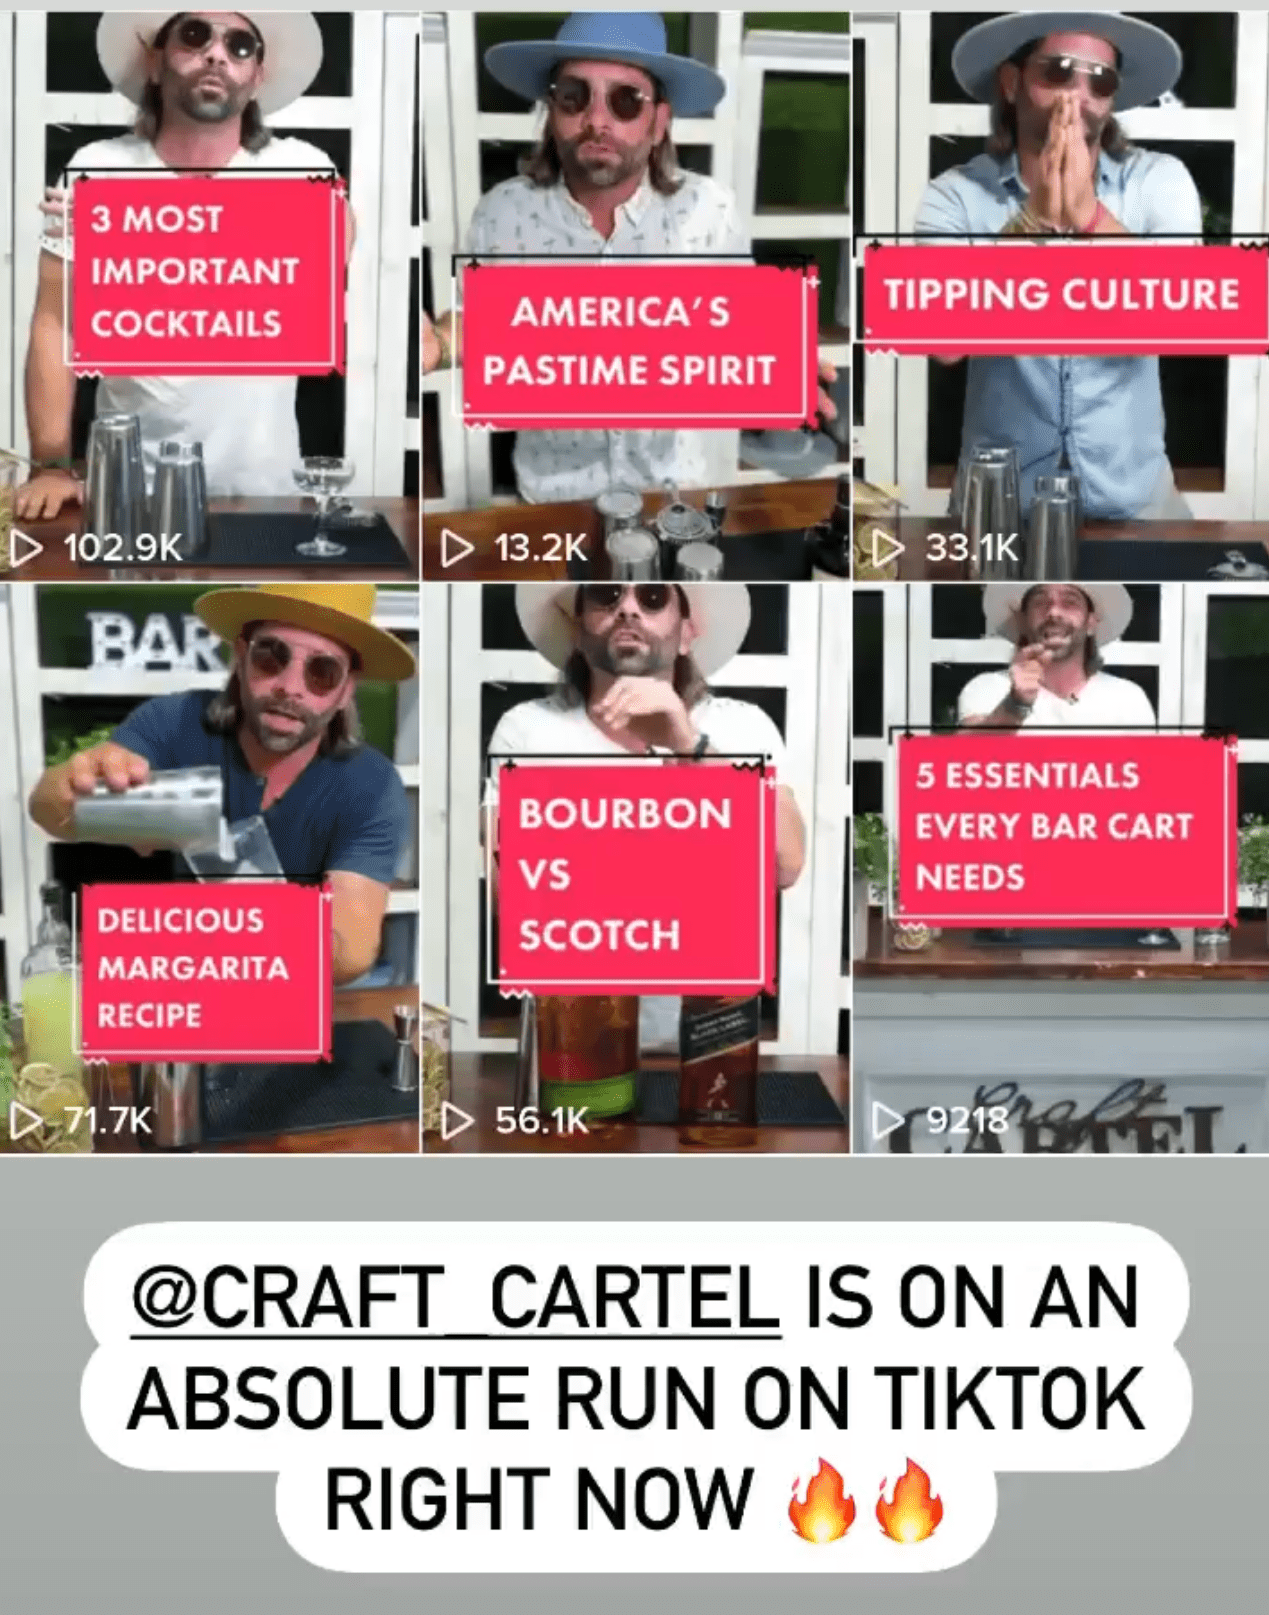 Craft Cartel Cocktail Catering Company Miami Florida celebrating a milestone after partnership with Deep Social